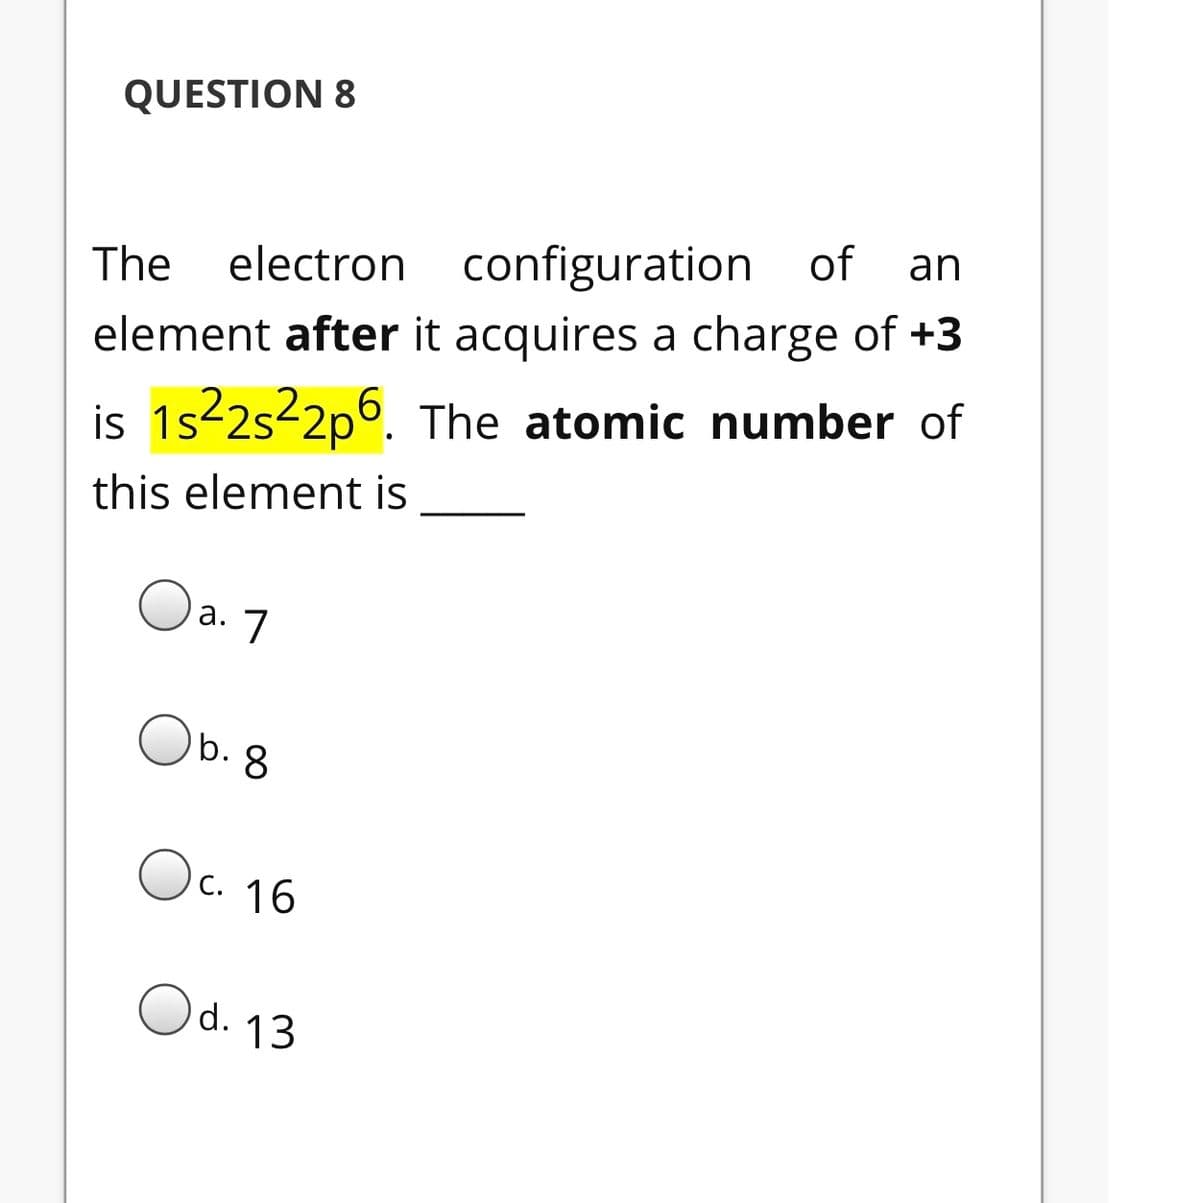 QUESTION 8
an
The
electron configuration of
element after it acquires a charge of +3
is 1s-2s-2p6. The atomic number of
this element is
Oa. 7
Ob. 8
Oc.
c. 16
Od. 13
